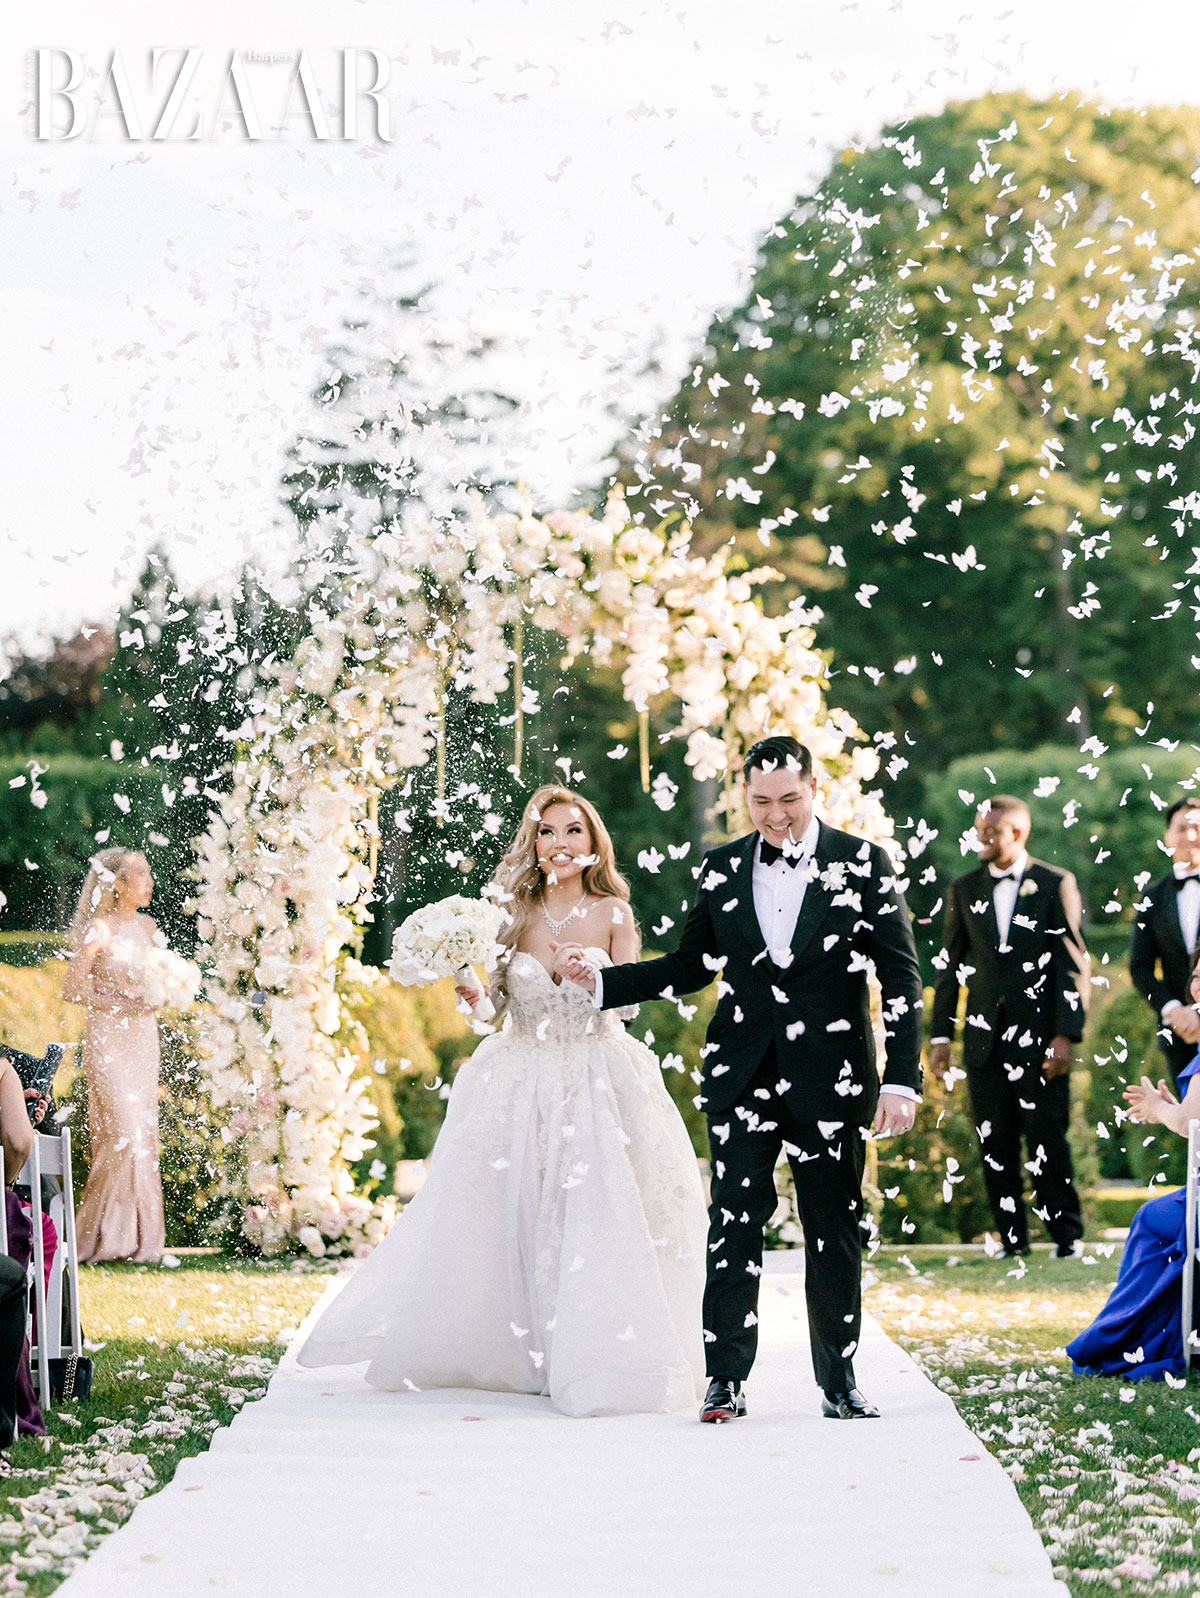 Andrew & Adrianna Lang's Fairytale Wedding at Oheka Castle